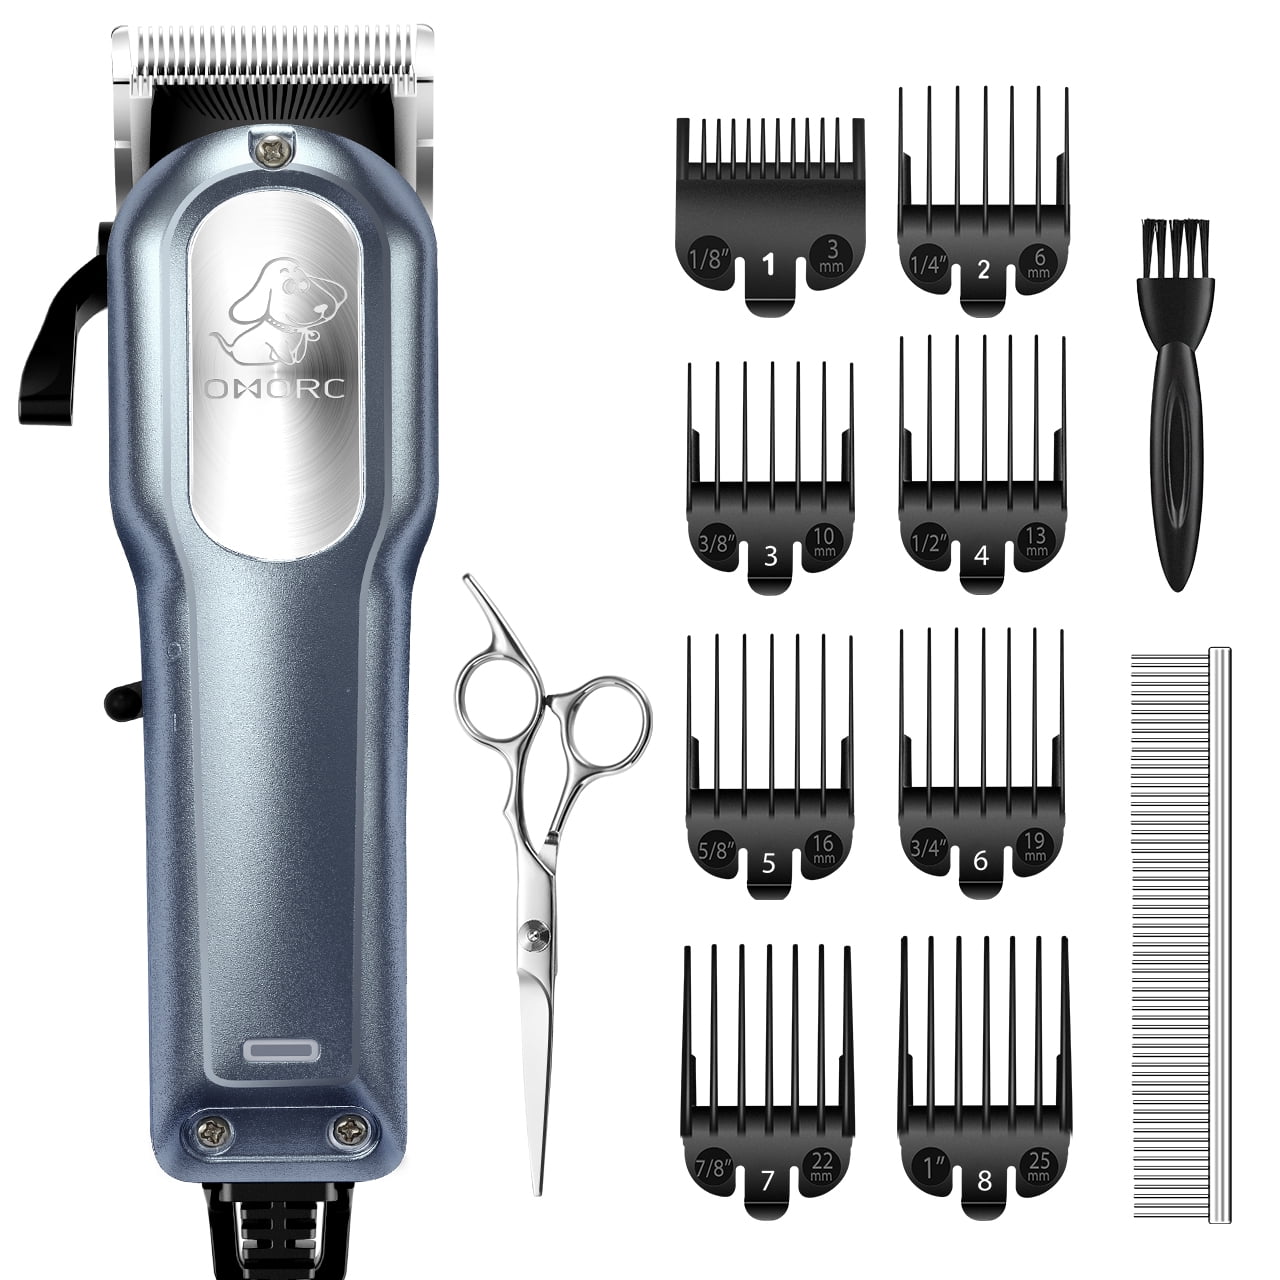 BIMZUC Dog Clippers Professional Electric Hair Trimmers Shaver for Dogs Cats Pets Low Noise Rechargeable Cordless Dog Grooming Kit 